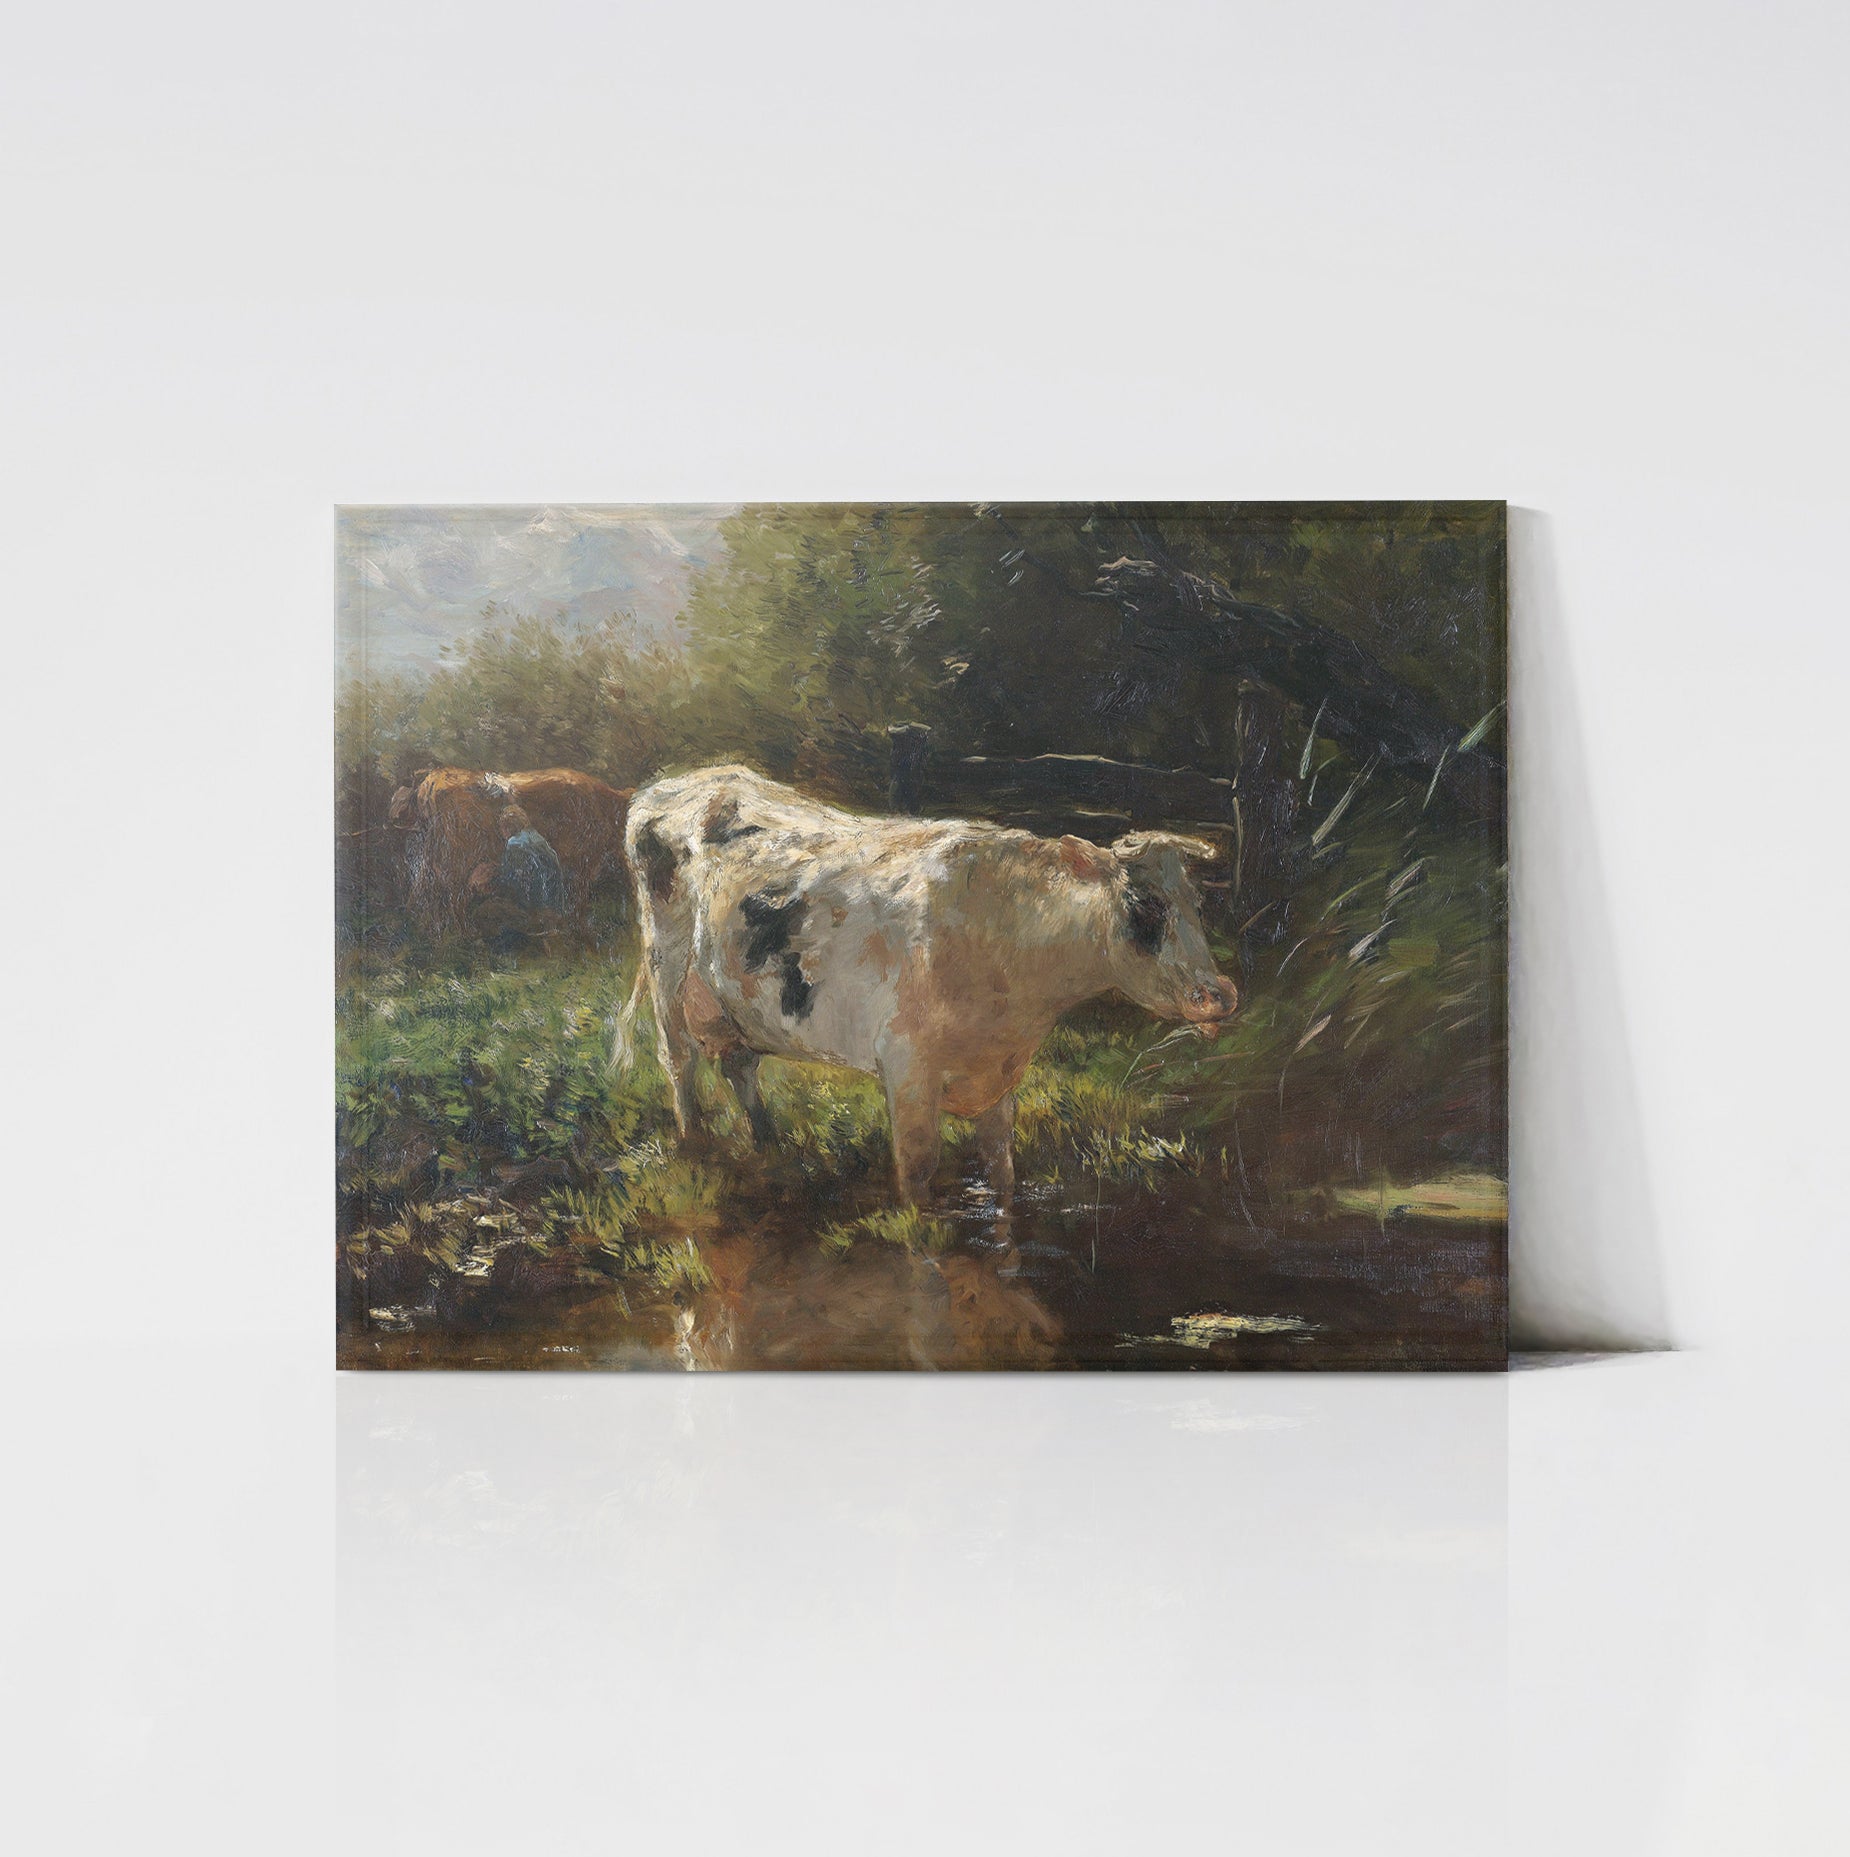 An unframed vintage art print titled 'Spotted Cow,' depicting a serene countryside scene with a black-and-white cow standing near a reflective pond. The lush greenery and soft lighting create a tranquil, pastoral atmosphere.